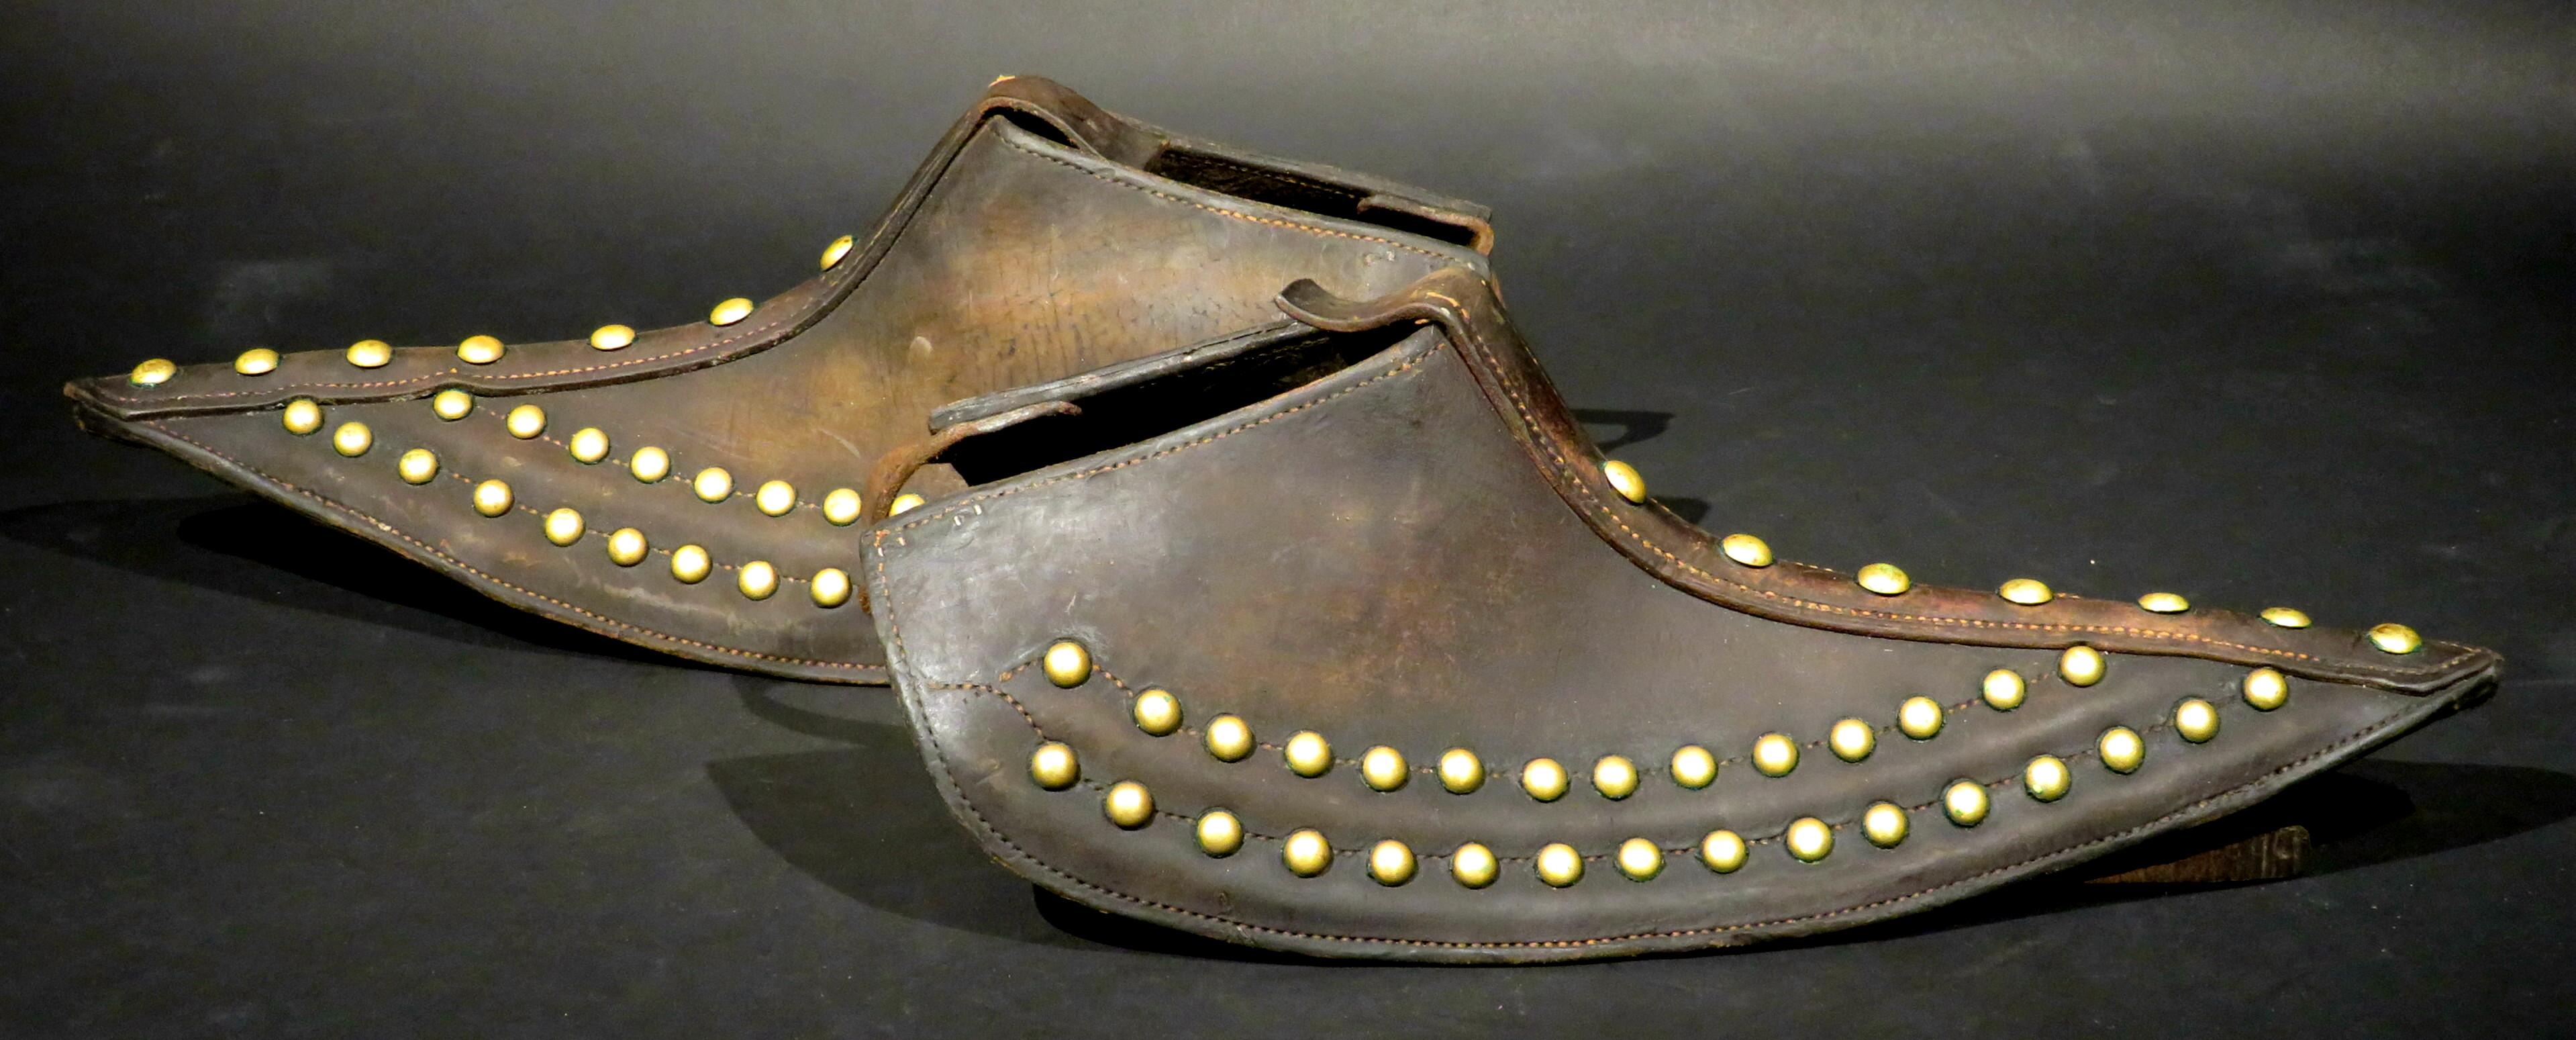 Tapaderos (stirrup covers) were used by ranchers when herding cattle in the brush and open field.
Made of stitched heavy gauge leather and decorated with applied brass studs, both retaining their original adjustable straps & metal clasps.